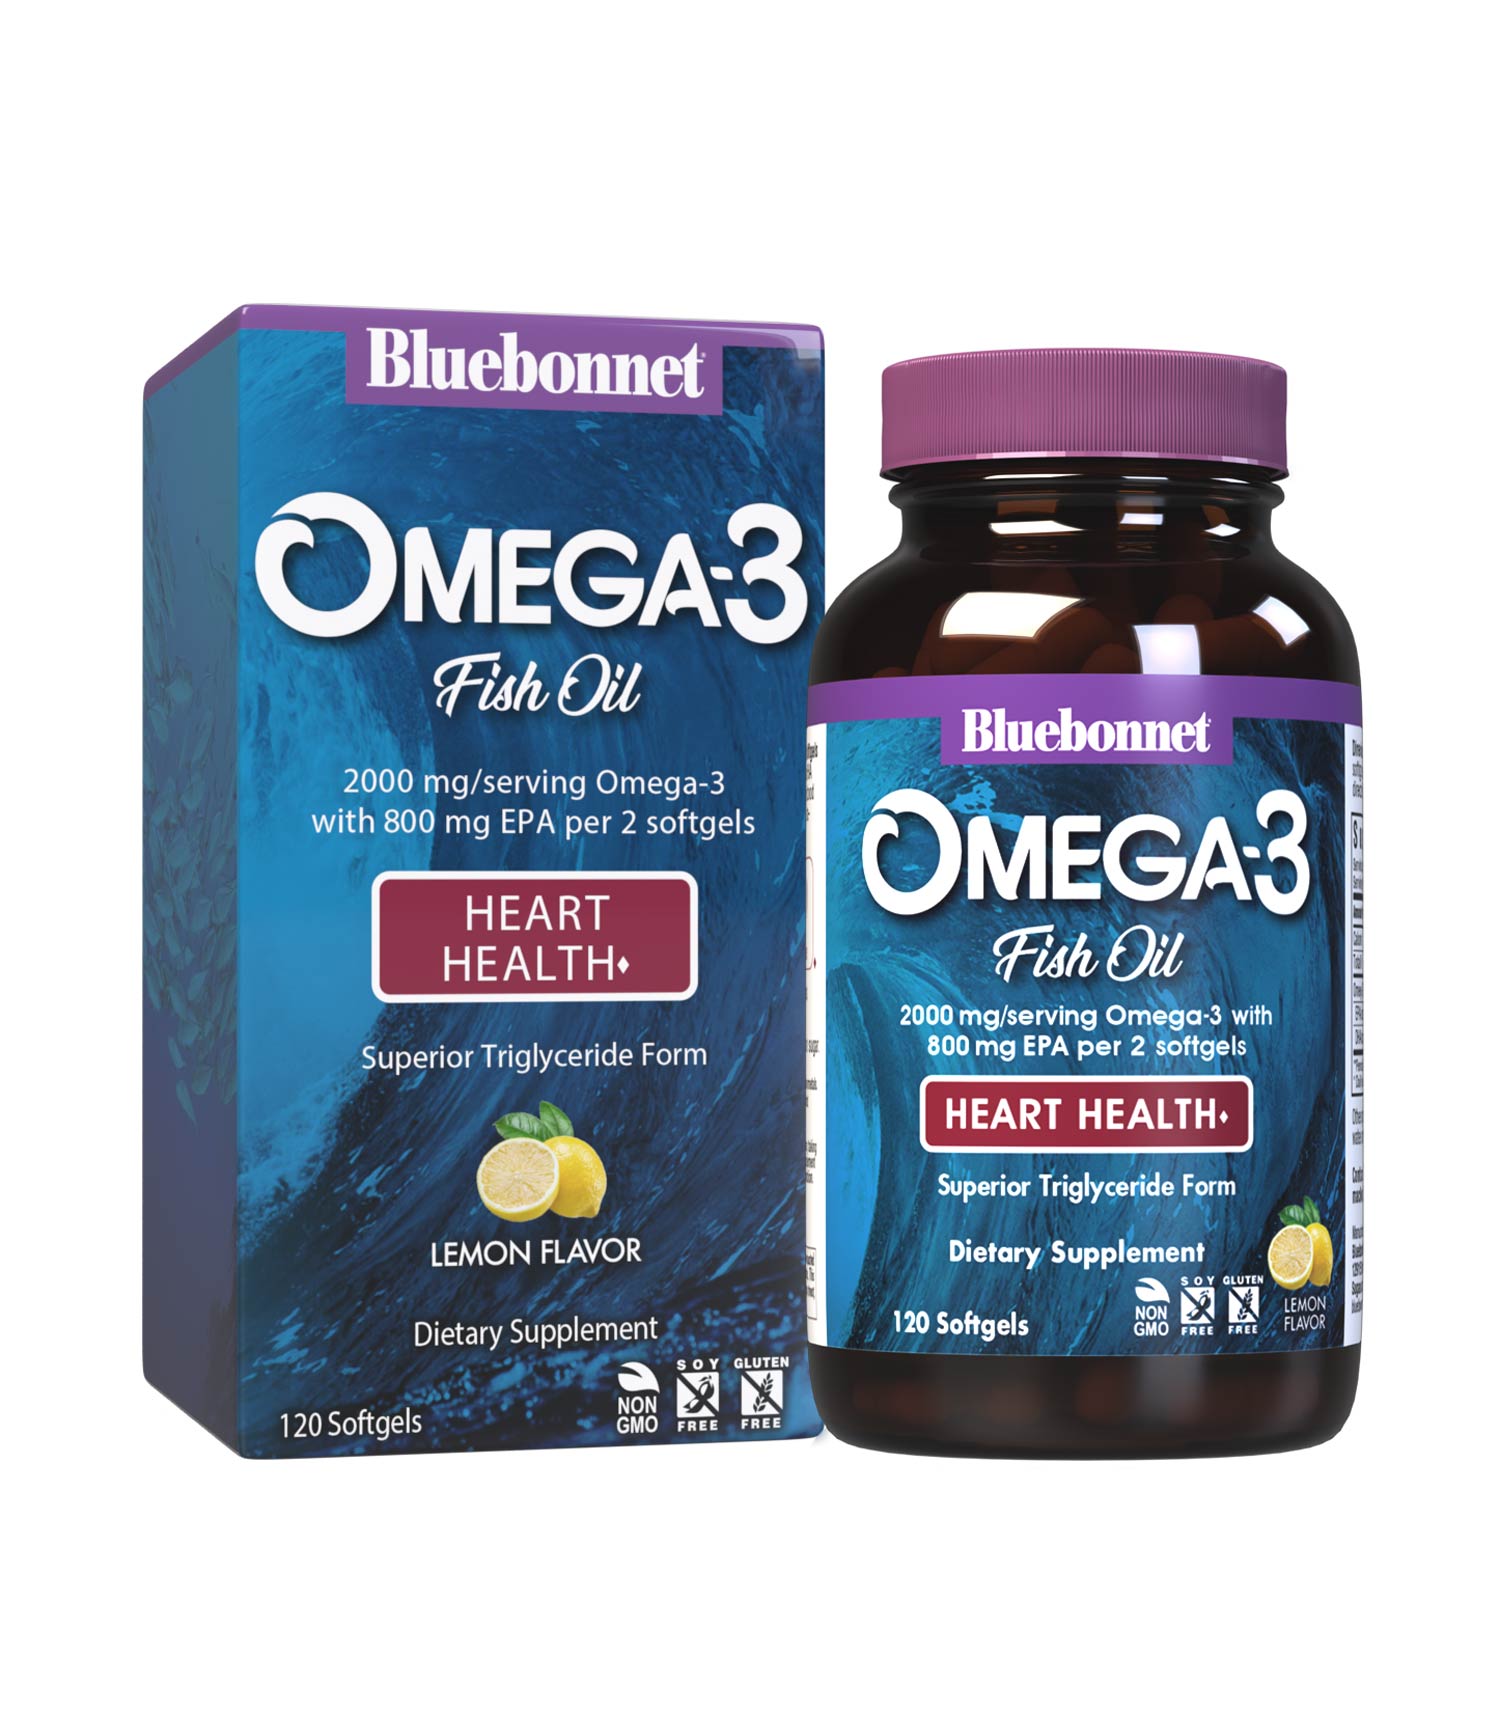 Bluebonnet’s Omega-3 Fish Oil Heart Health 120 Softgels are formulated with a specific ratio of EPA and DHA to help support heart function, blood flow, and blood pressure within the normal range by utilizing ultra-refined omega-3s from wild-caught fish. With box. #size_120 count